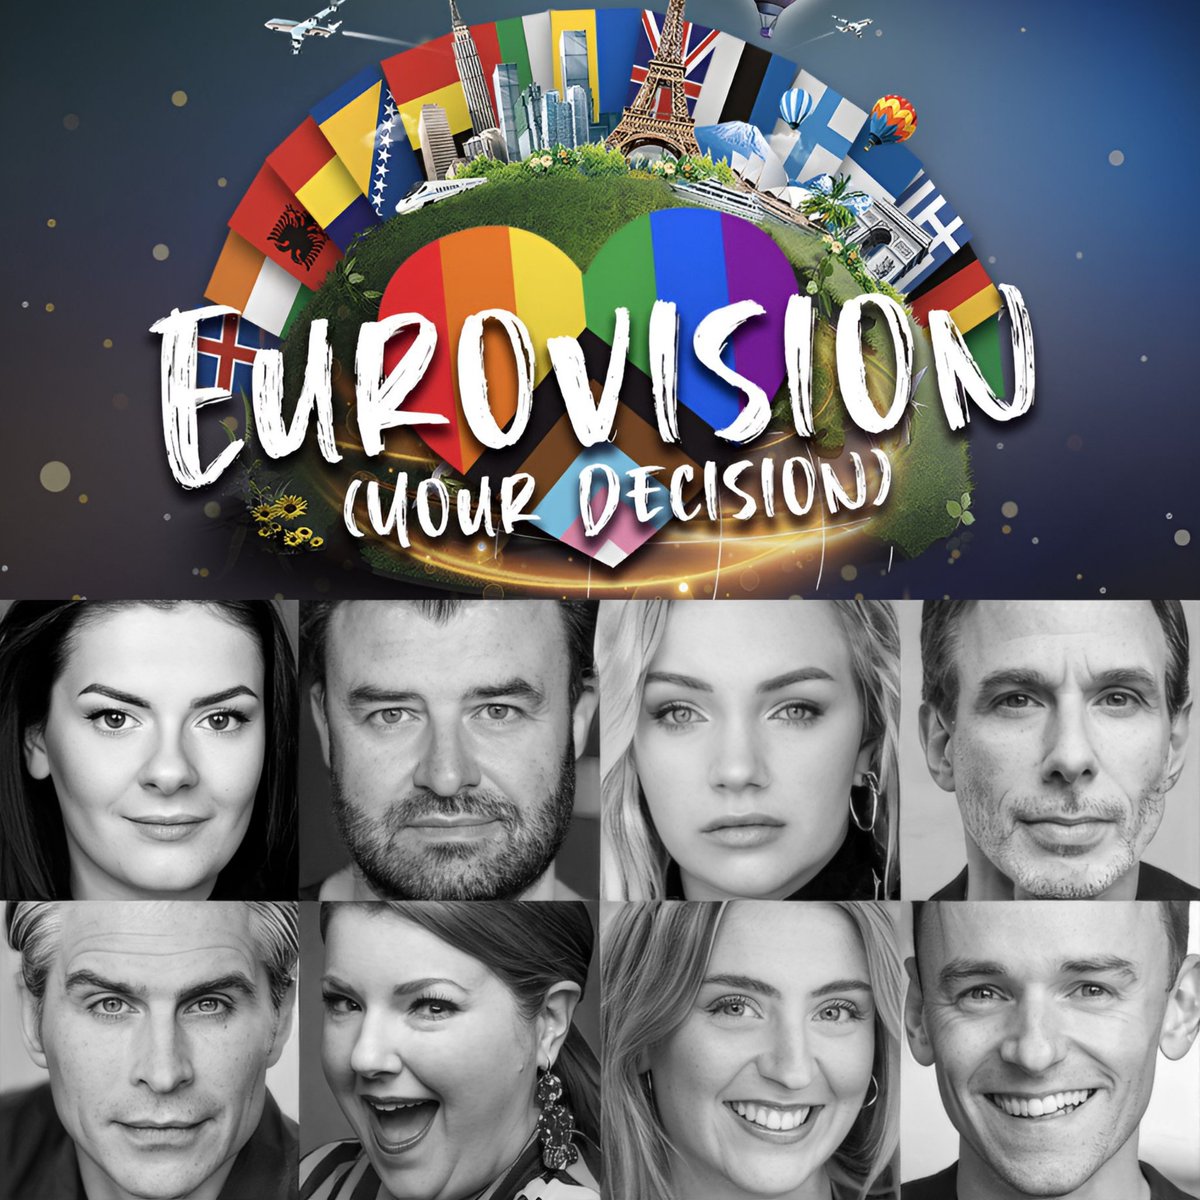 NEWS: ⭐ LUCY PENROSE, TIM MCARTHUR, LEANNE JONES & MORE ANNOUNCED FOR EUROVISION (YOUR DECISION) ⭐ Read more - theatrefan.co.uk/lucy-penrose-t…